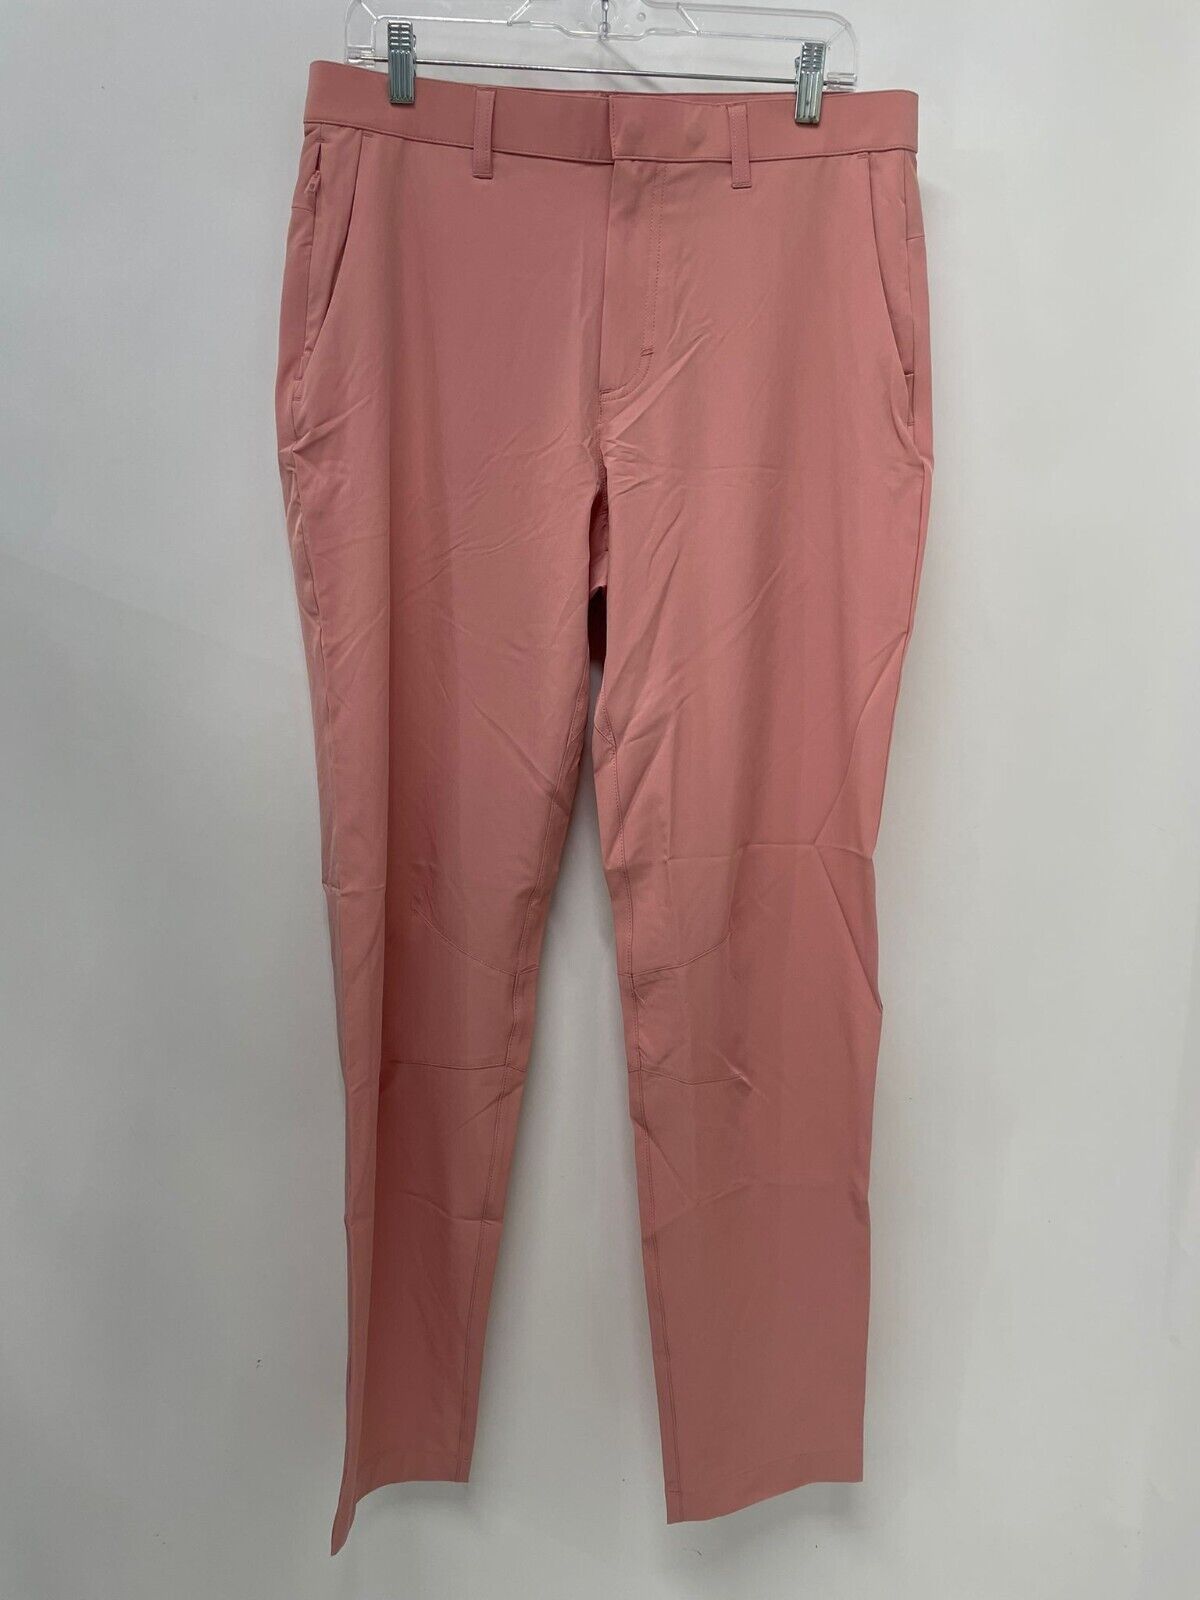 Fabletics Mens M Tall The Only Pant Performance Chino Shadow Pink Modern Slim